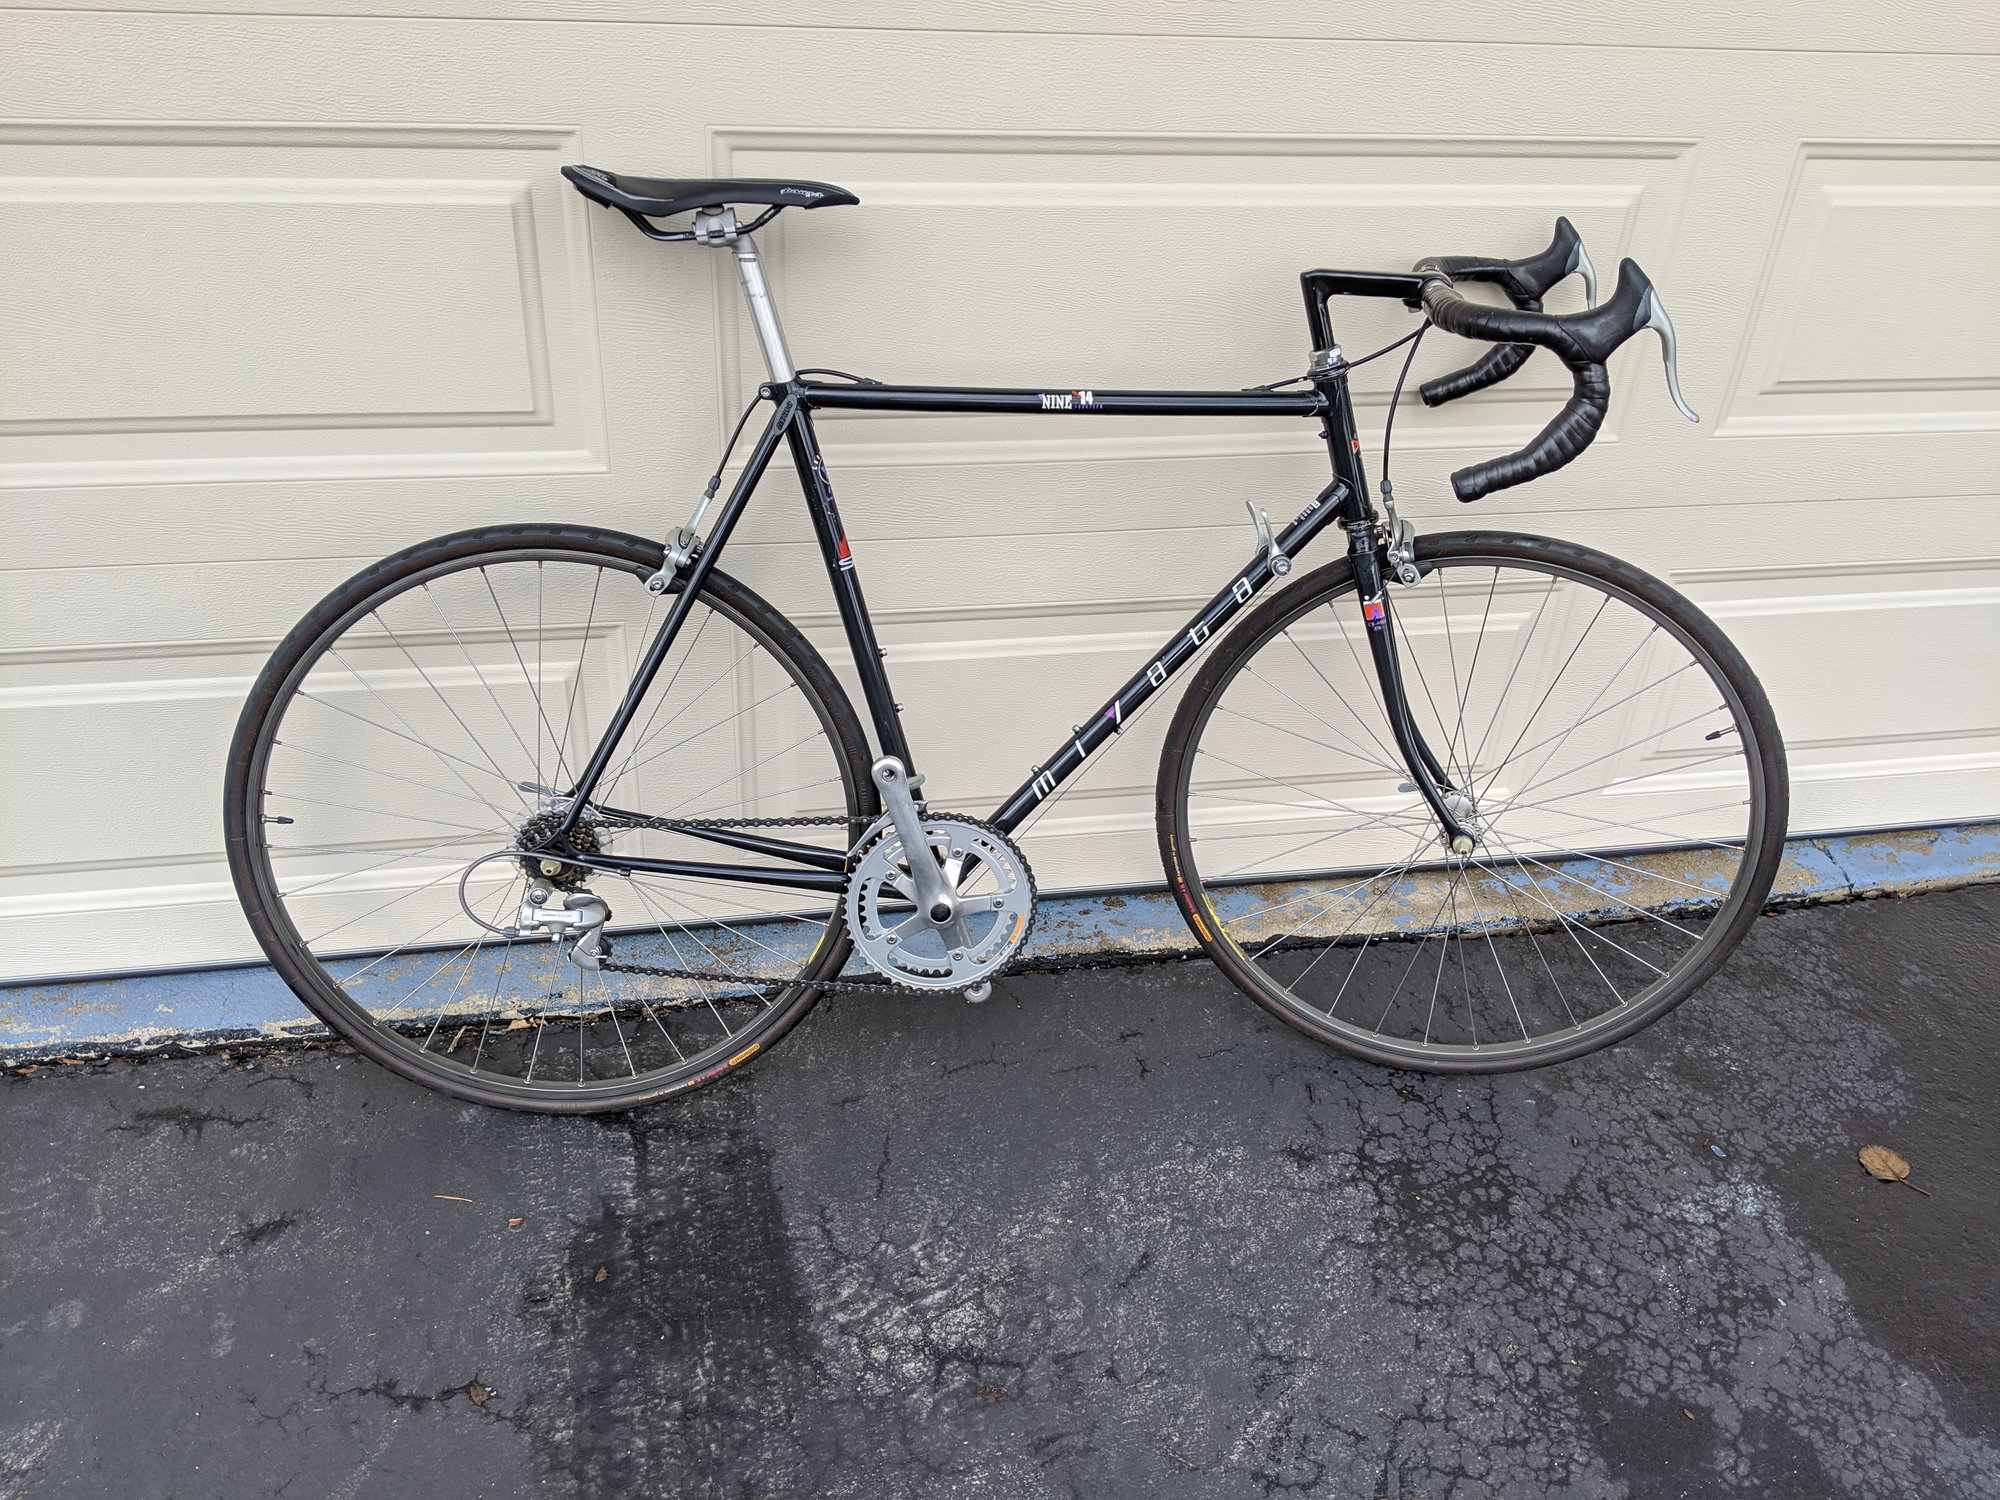 Miyata 914 I'm not sure what to do with it. - Bike Forums